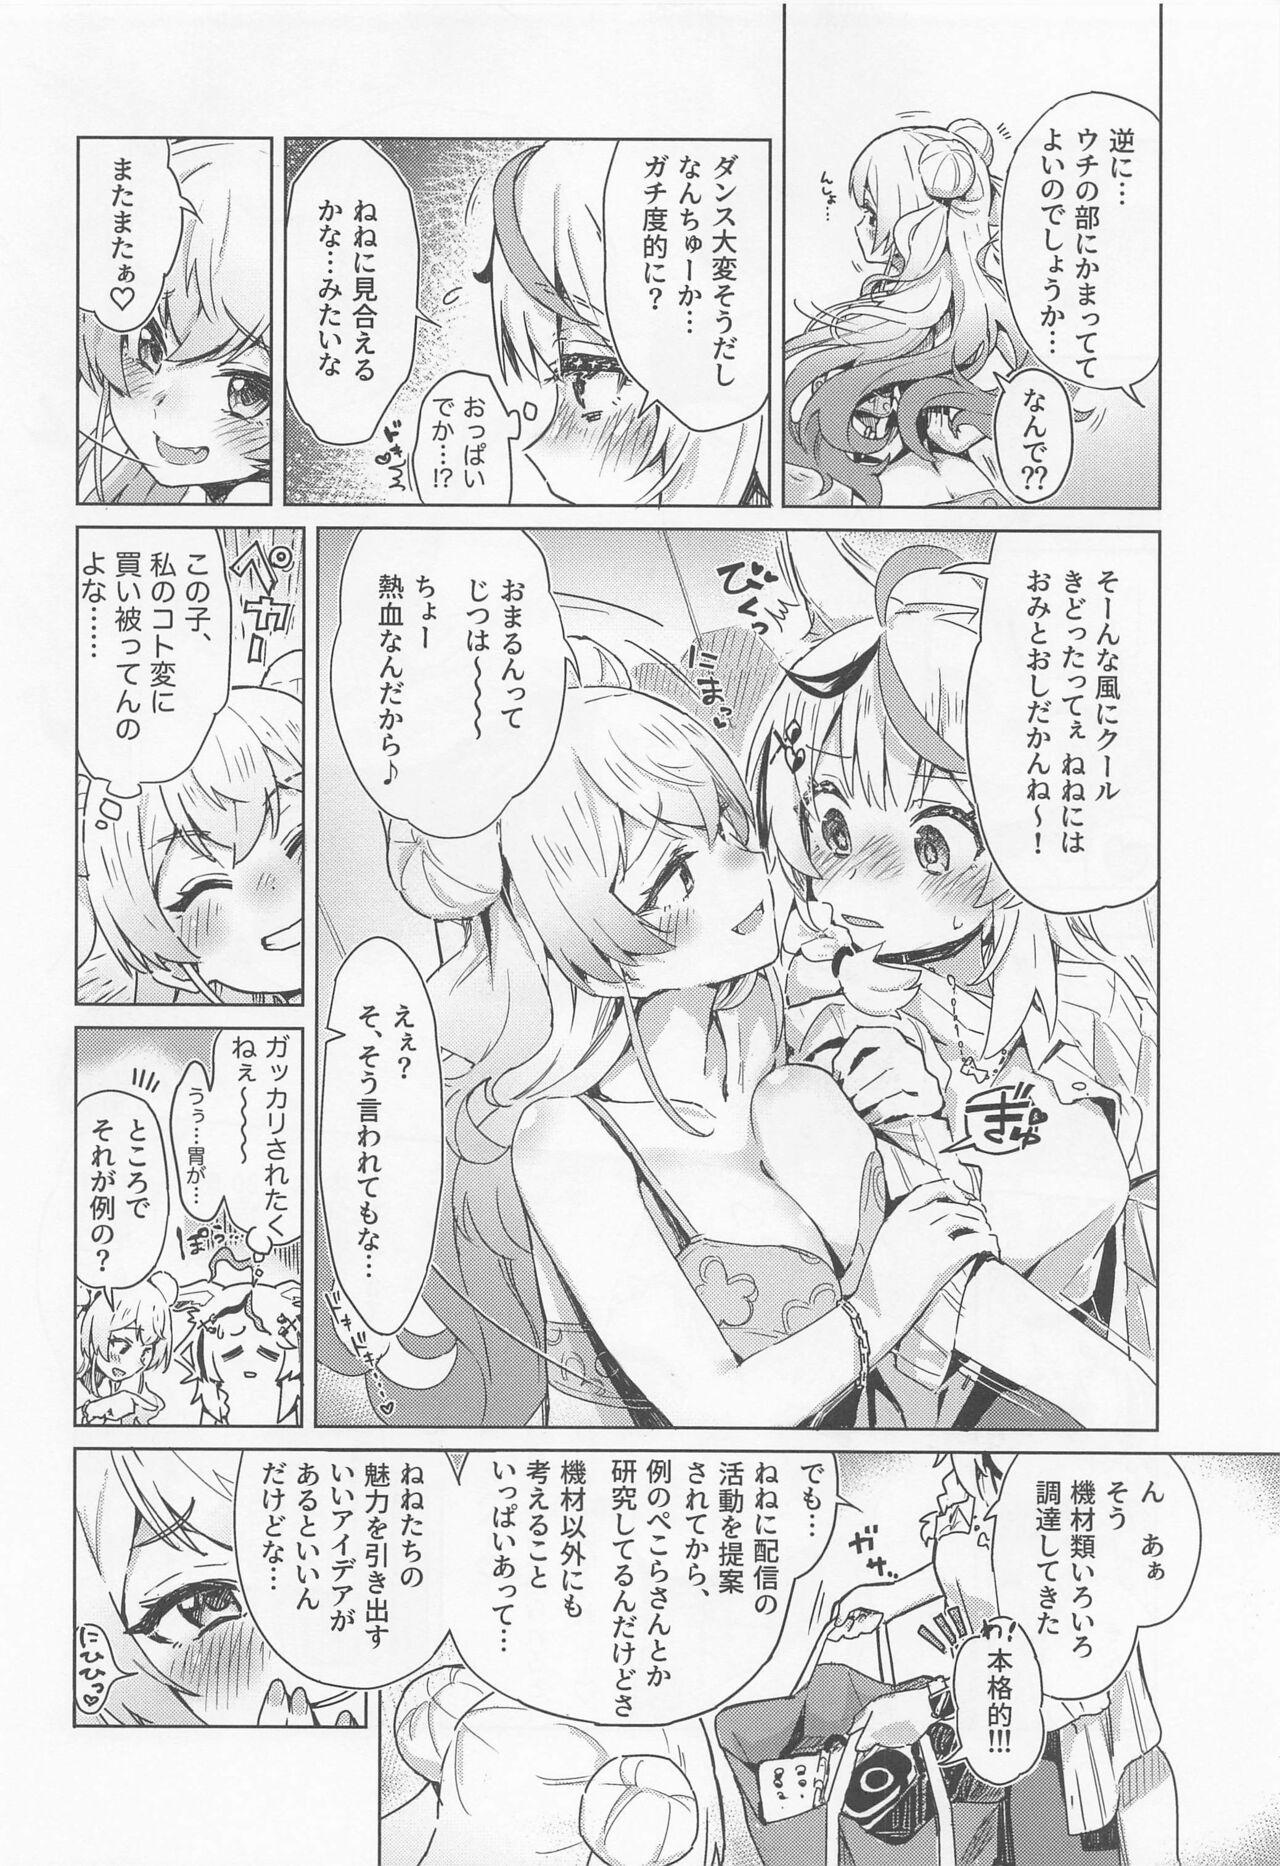 Fennec wa Iseijin no Yume o Miru ka - Does The Fennec Dream of The Lovely Visitor? 6